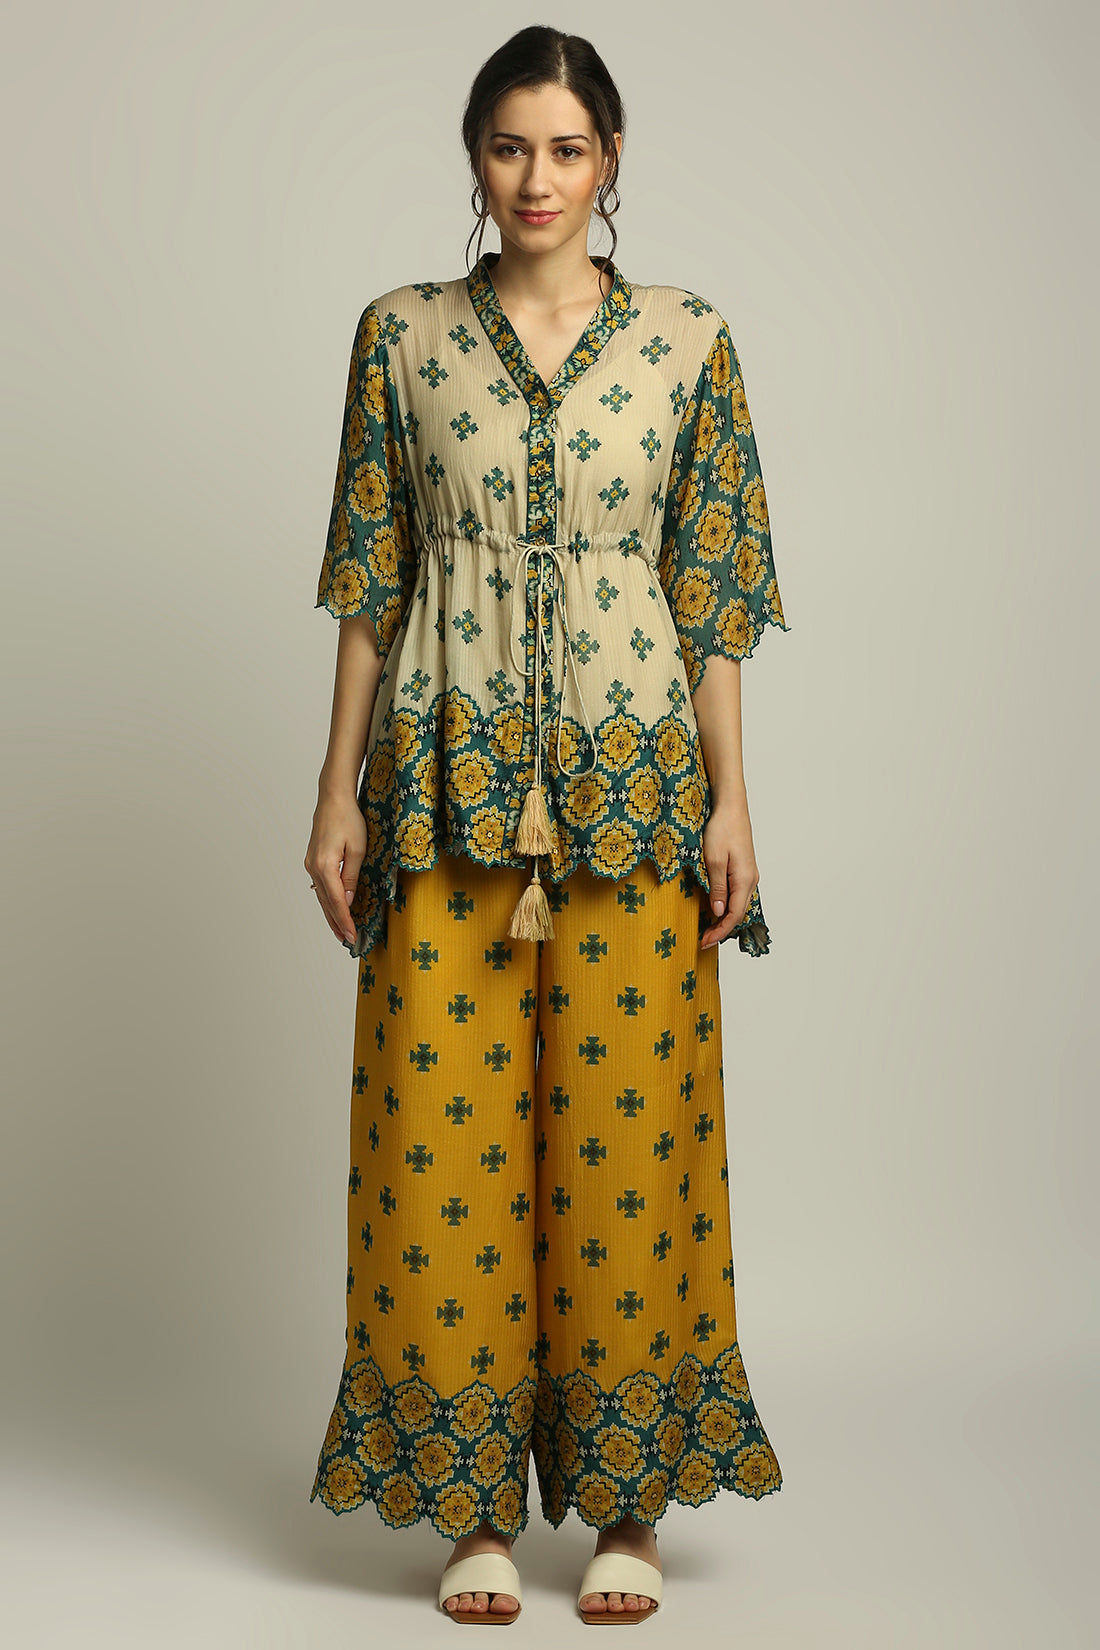 Tiraz Printed Embellished Top With Pant